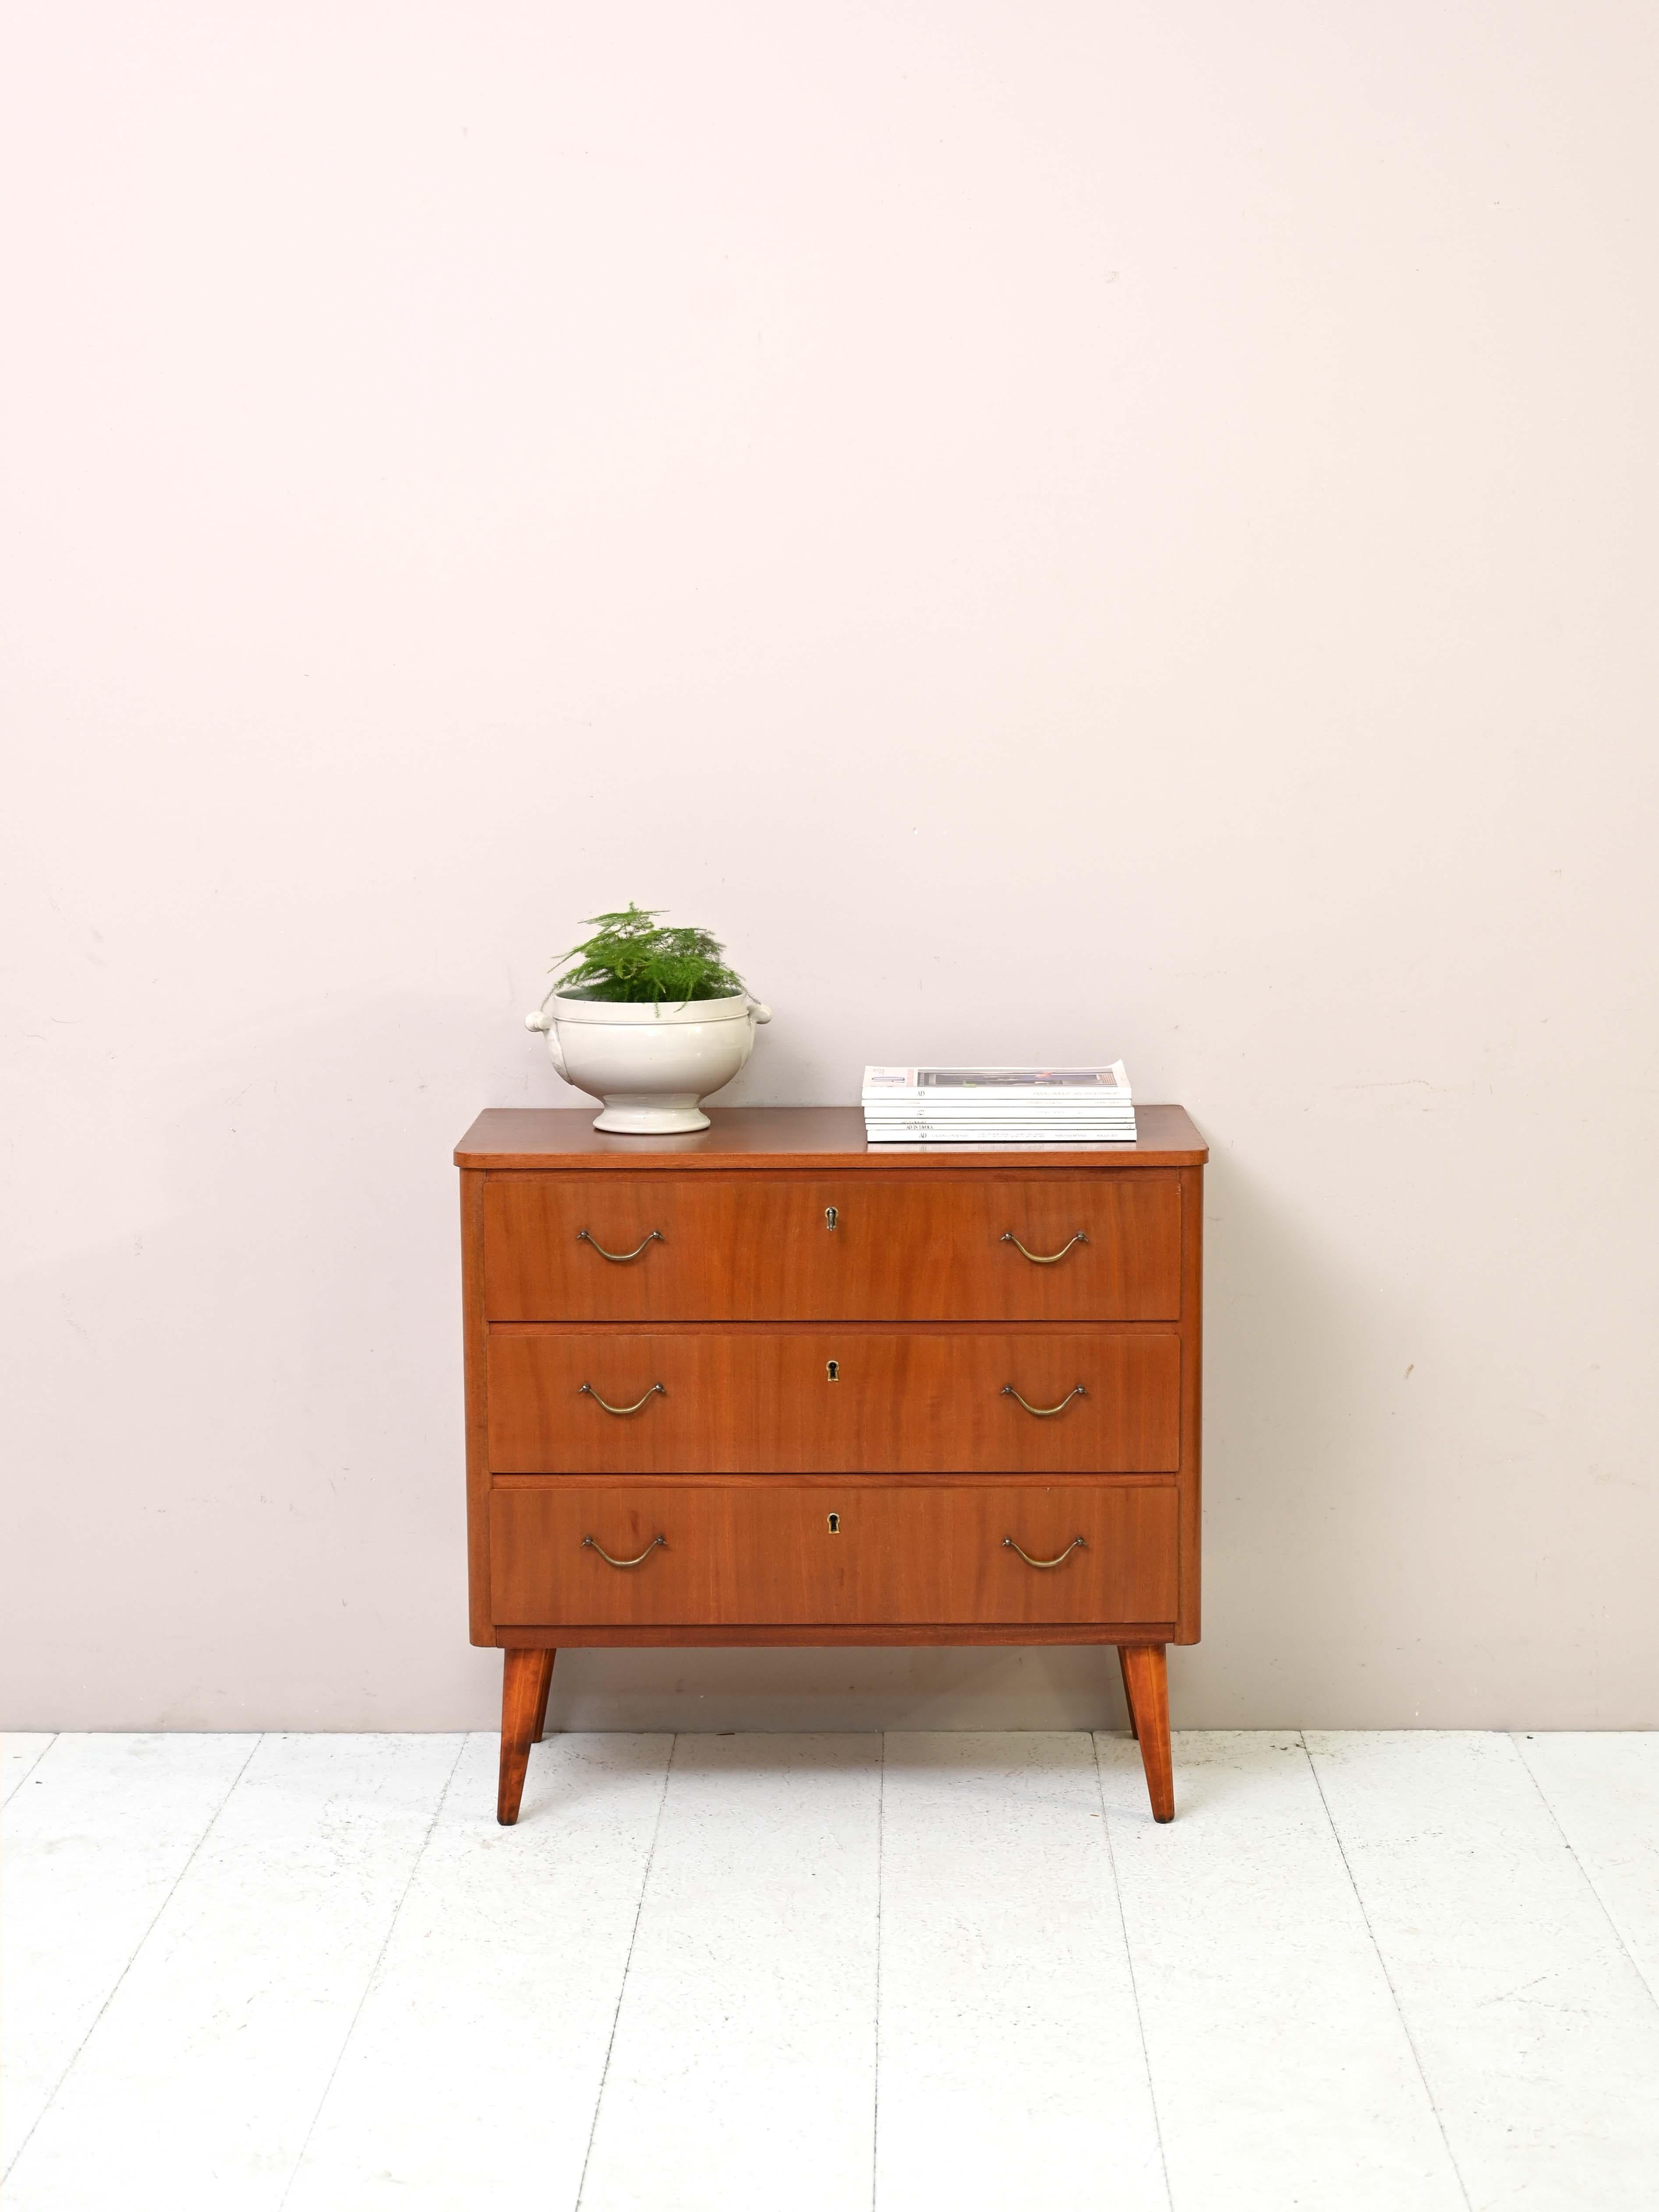 Scandinavian 1960s cabinet with drawers.

This retro-looking chest of drawers is distinguished by its details equipped with handles and a lock. The classic lines of the top with rounded edges and conical legs make it a piece of furniture with